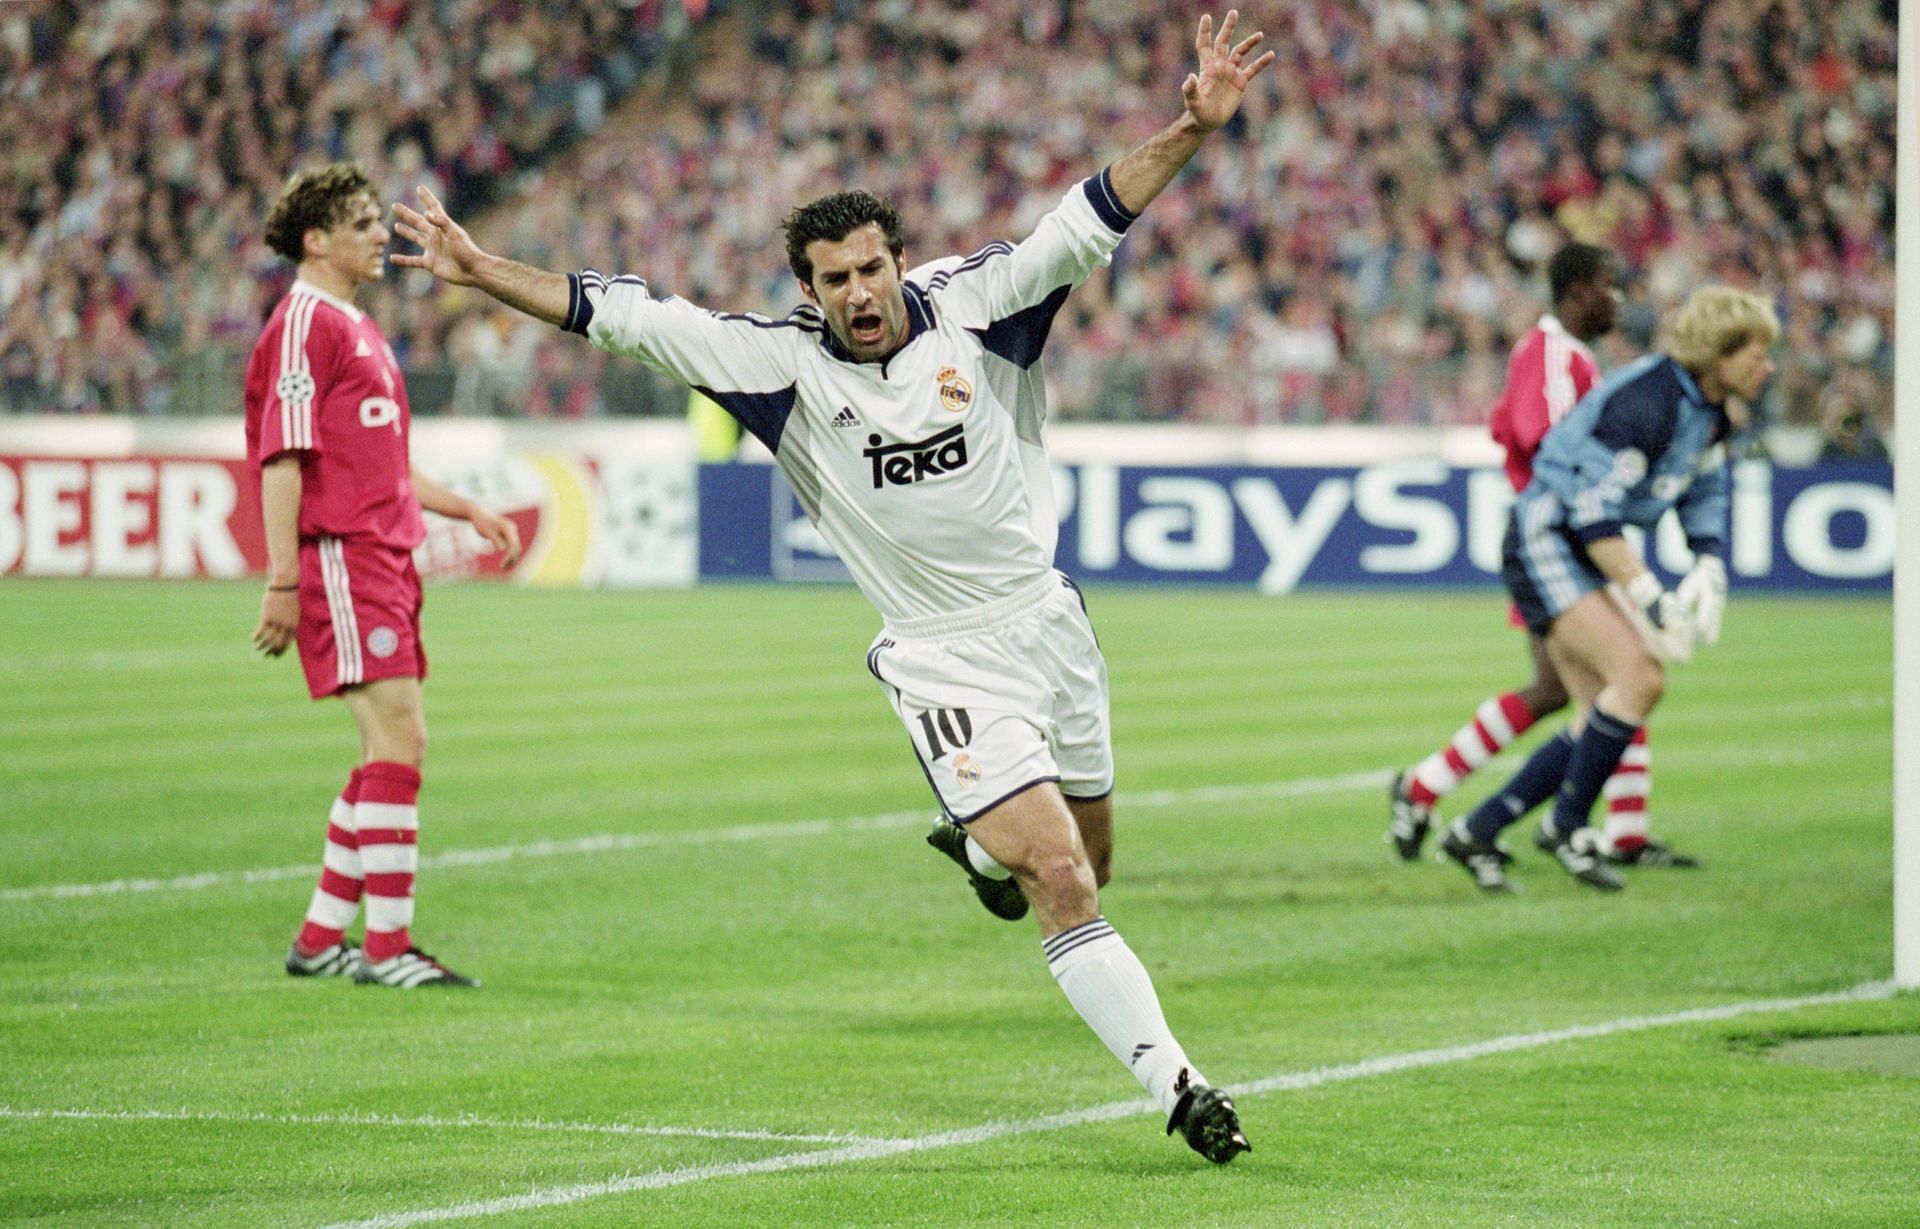 Luis Figo celebrates after scoring a goal for Real Madrid